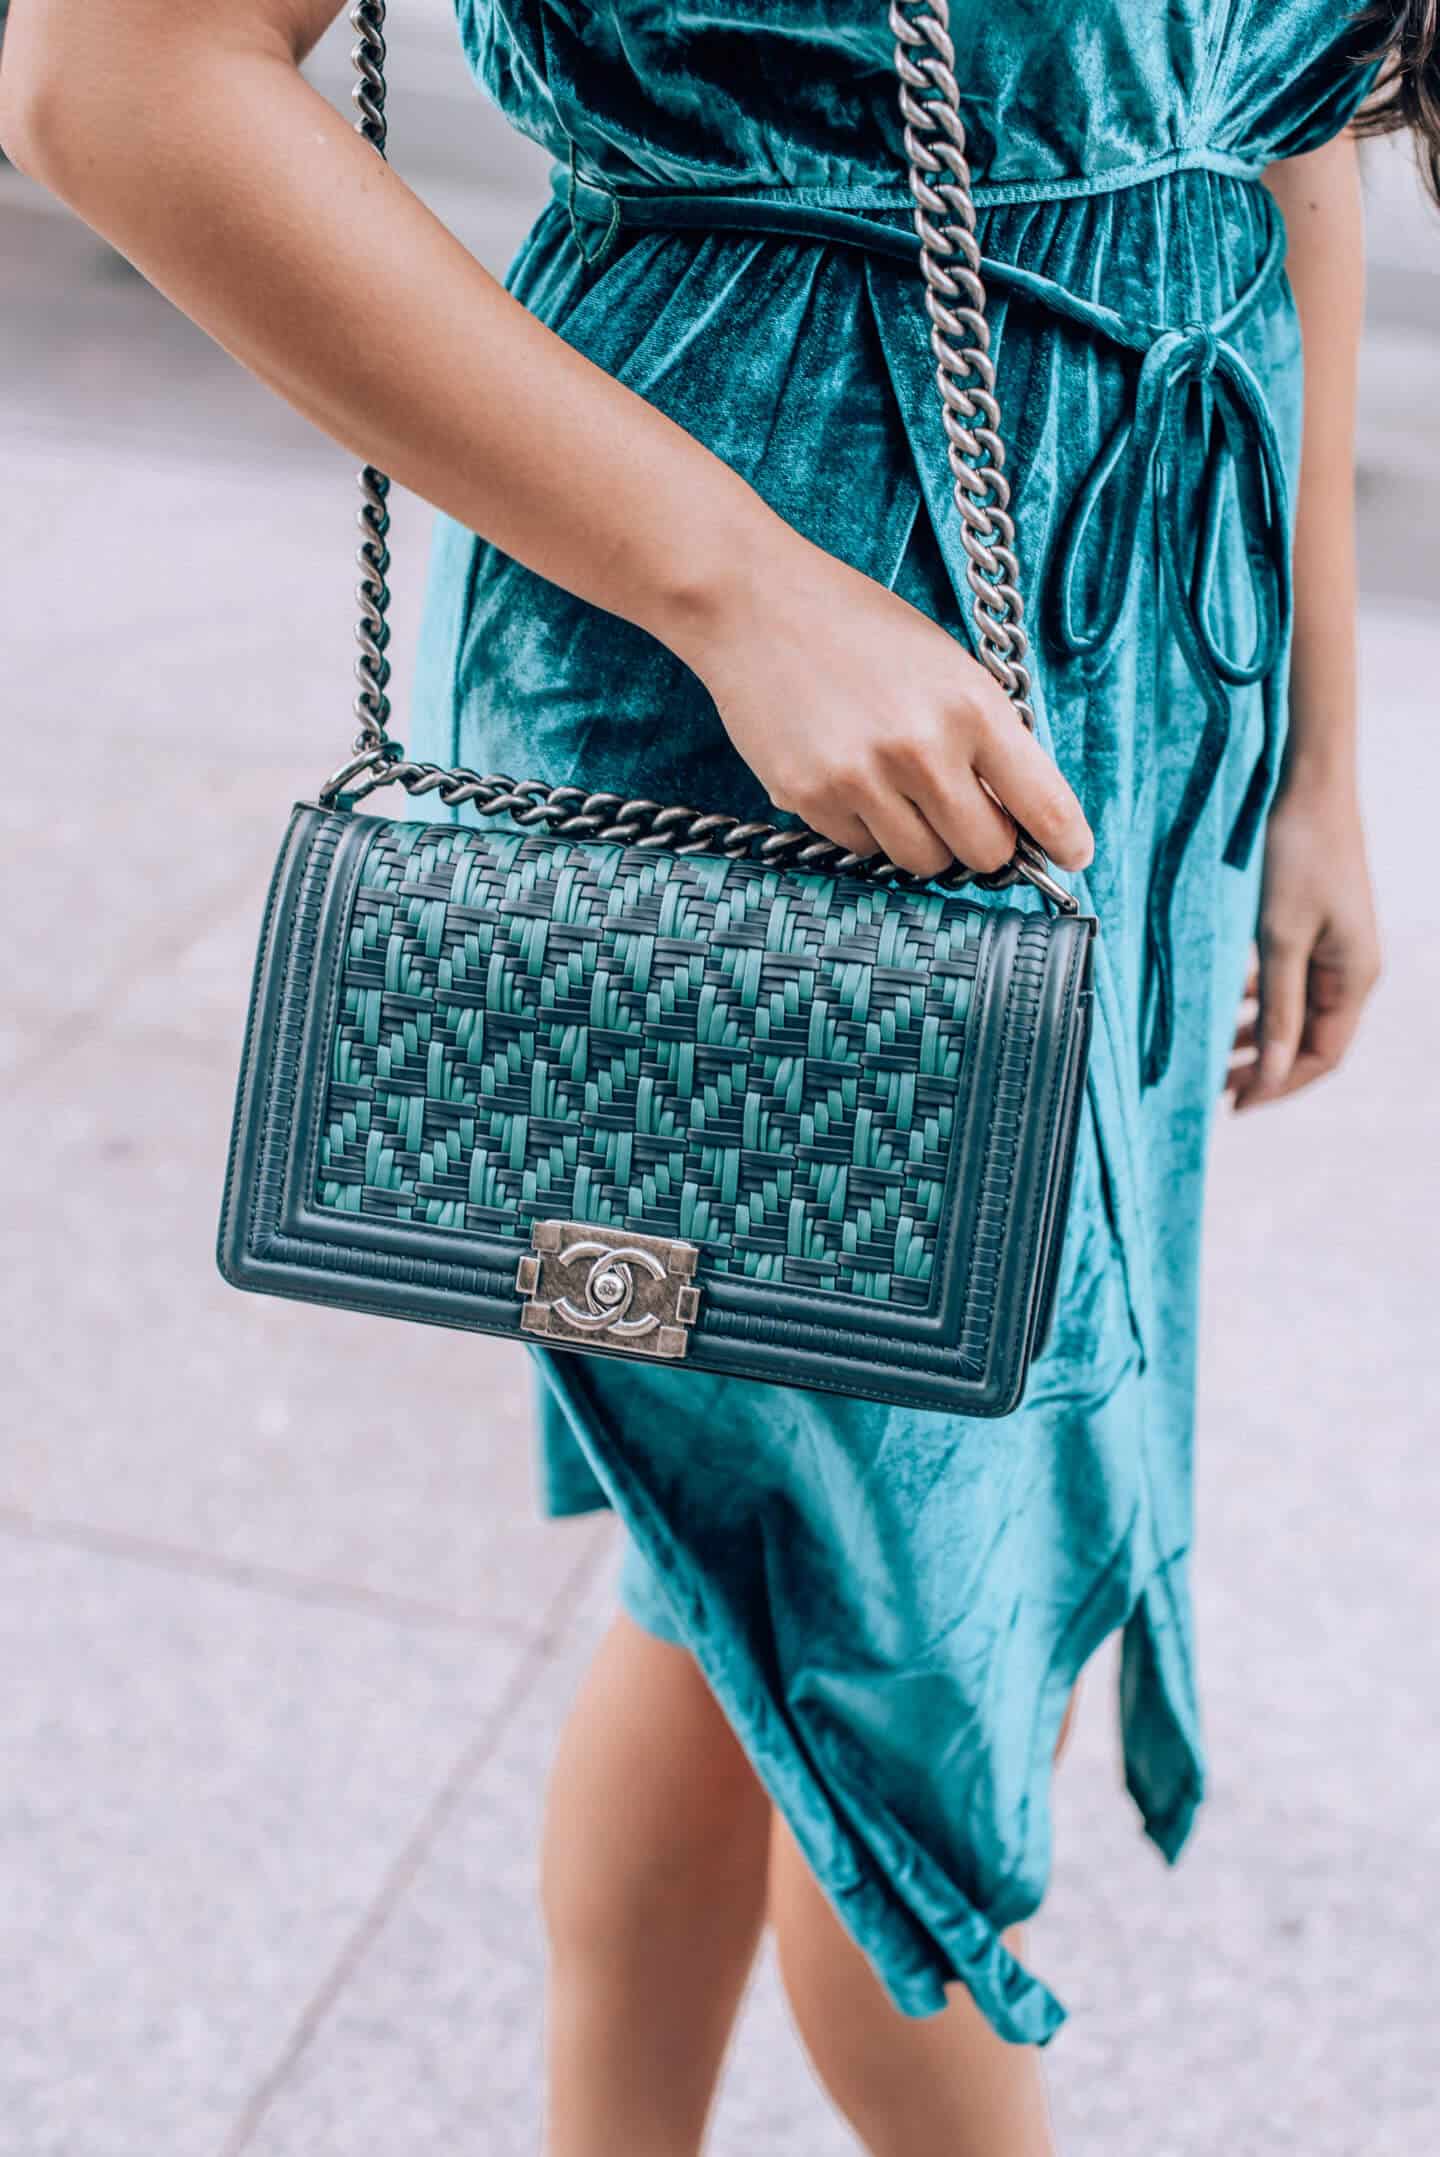 Tips for renting designer bags, by fashion blogger What The Fab